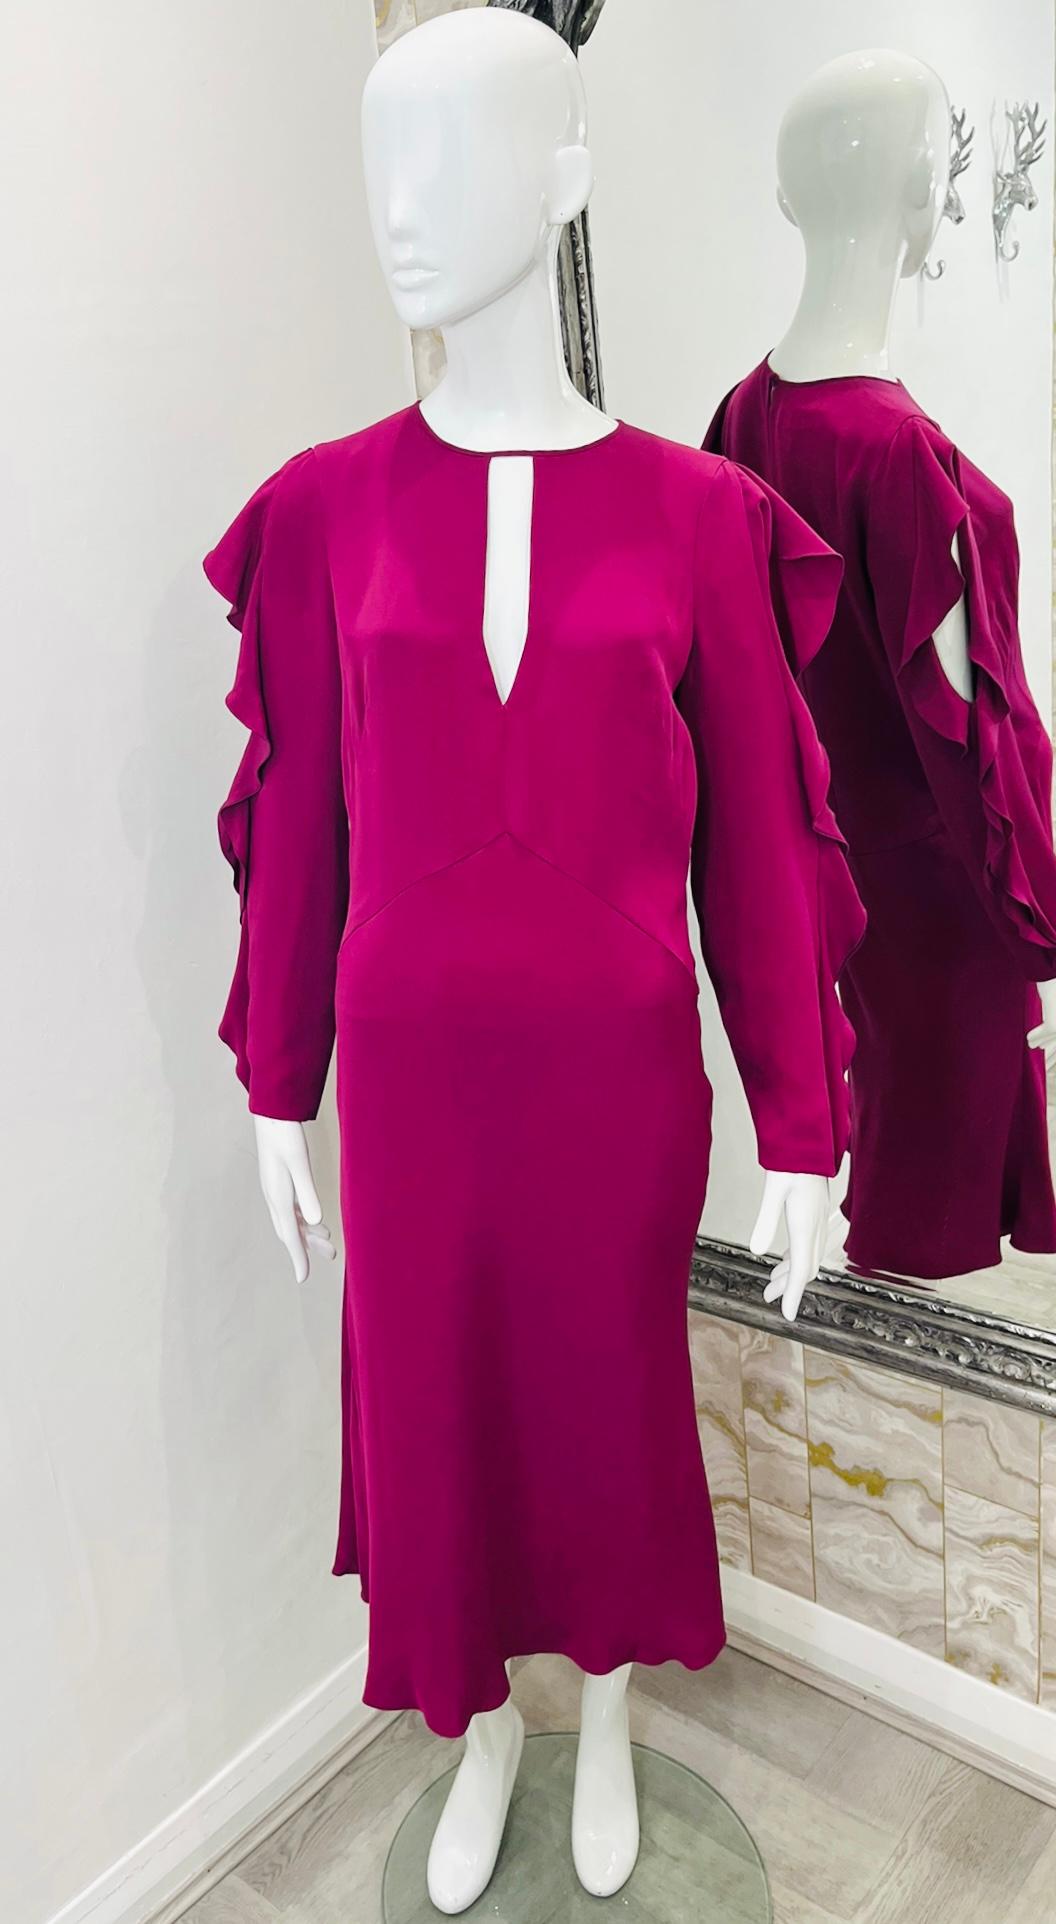 Emilio Pucci Silk Frill Dress

Dark fuchsia midi dress with deep teardrop cut out to the neckline.

Long frill embellished split sleeves, concealed zip fastening at back.

Fully lined with silk.

Size – 46IT

Condition – Very Good

Composition –